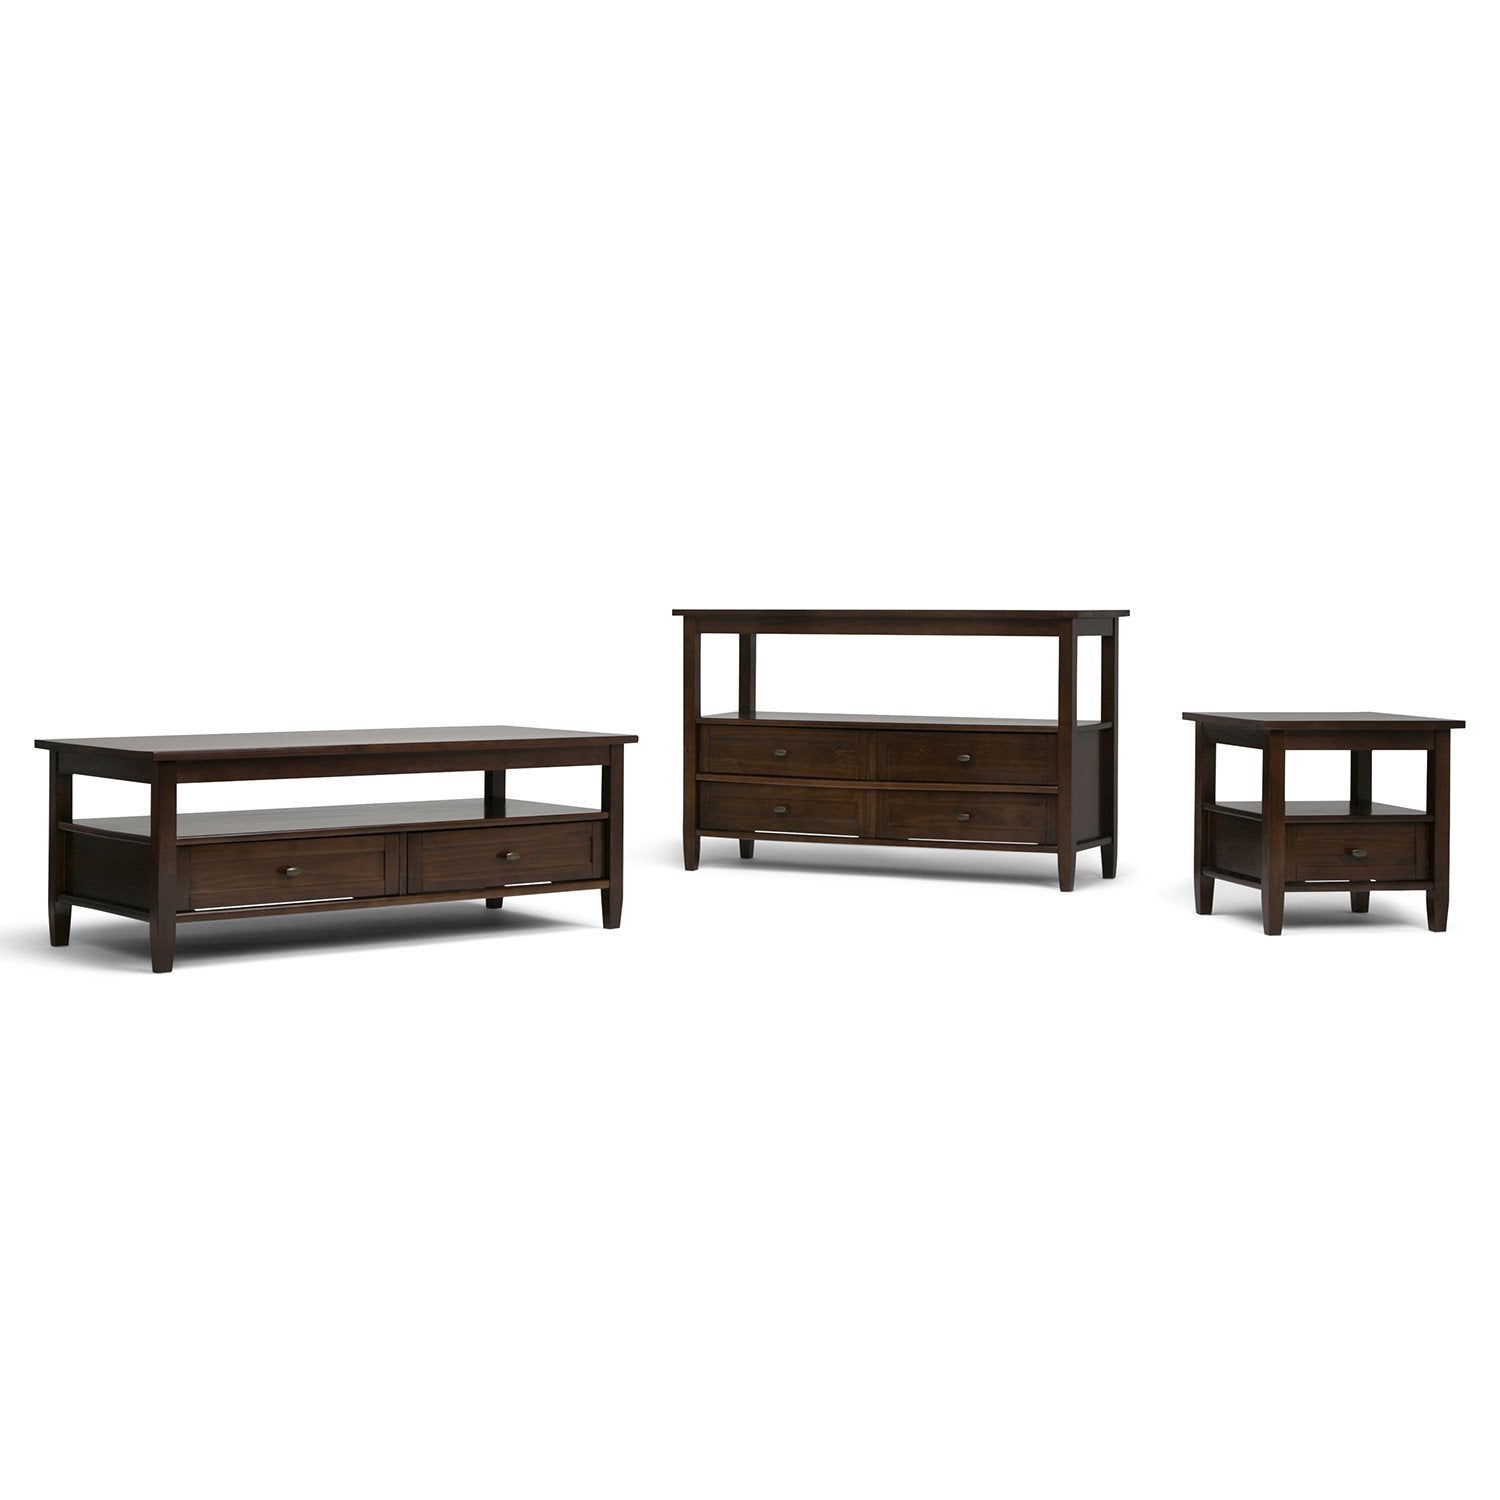 Tobacco Brown | Warm Shaker 48 inch Coffee Table